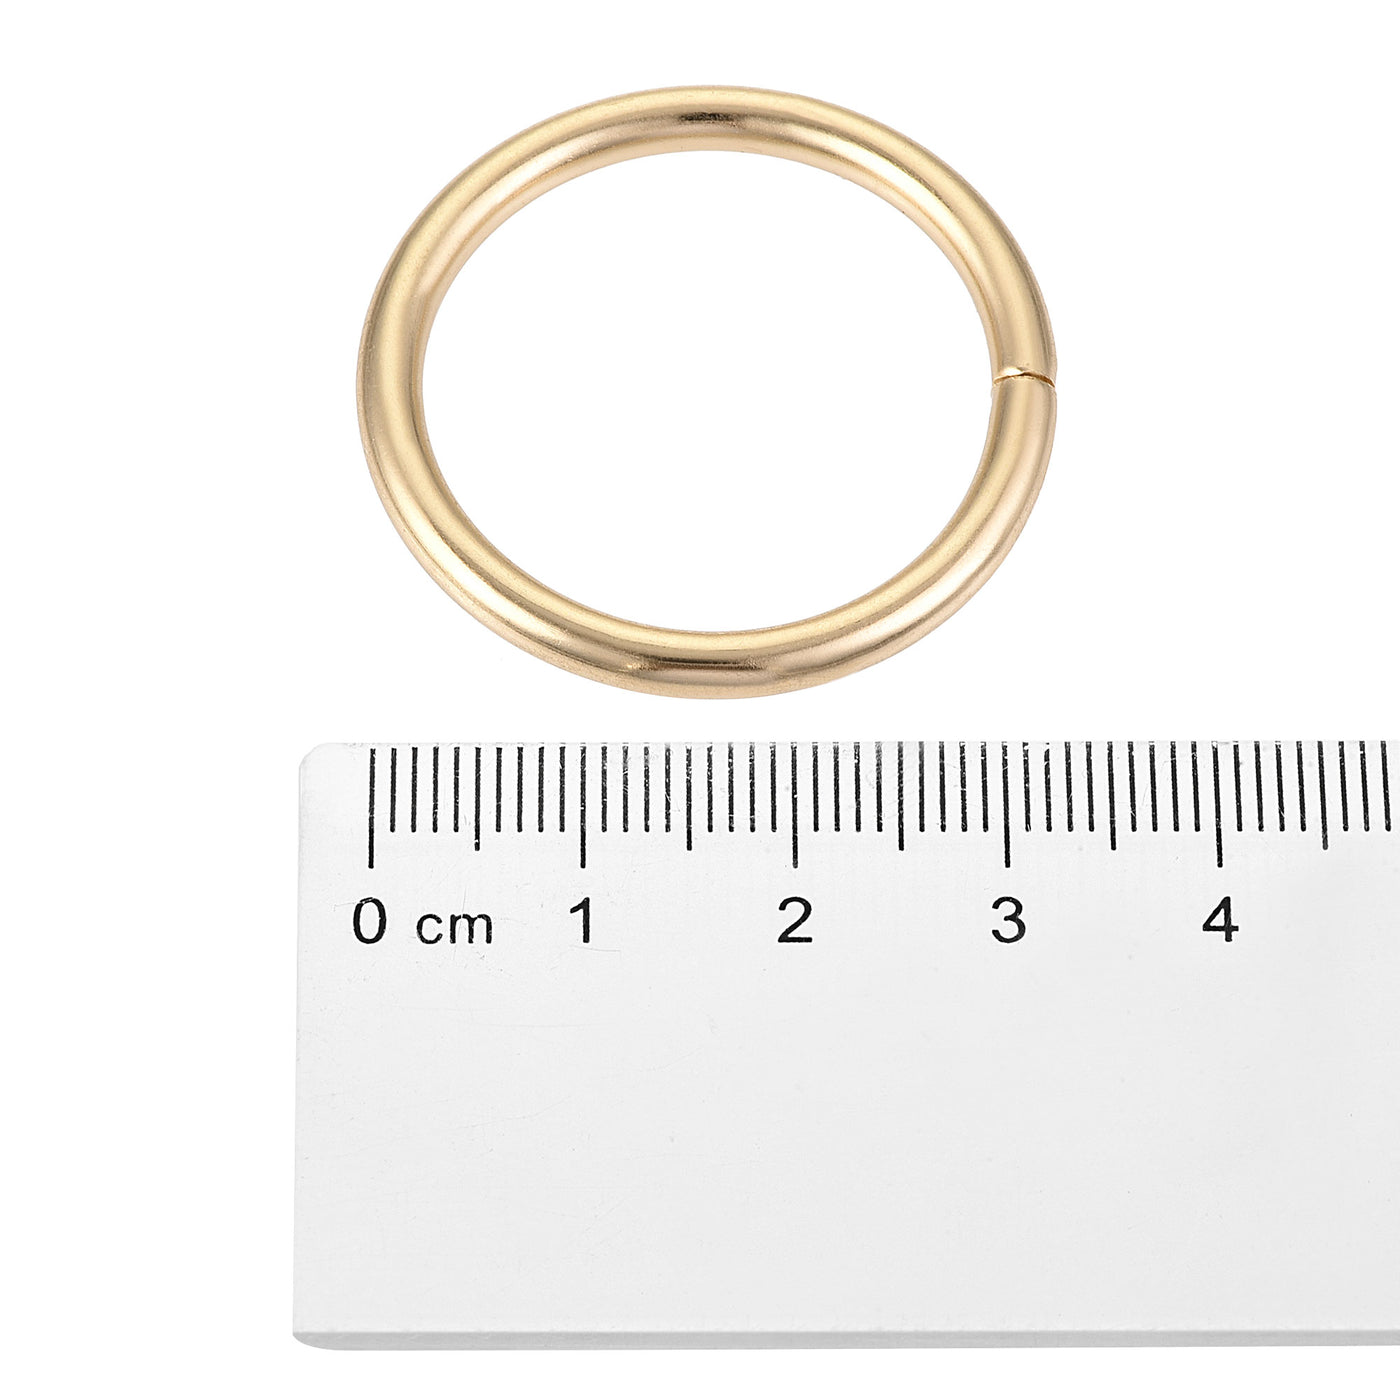 uxcell Uxcell 25mm Metal O Rings Non-Welded for Straps Bags Belts DIY Gold Tone 50pcs